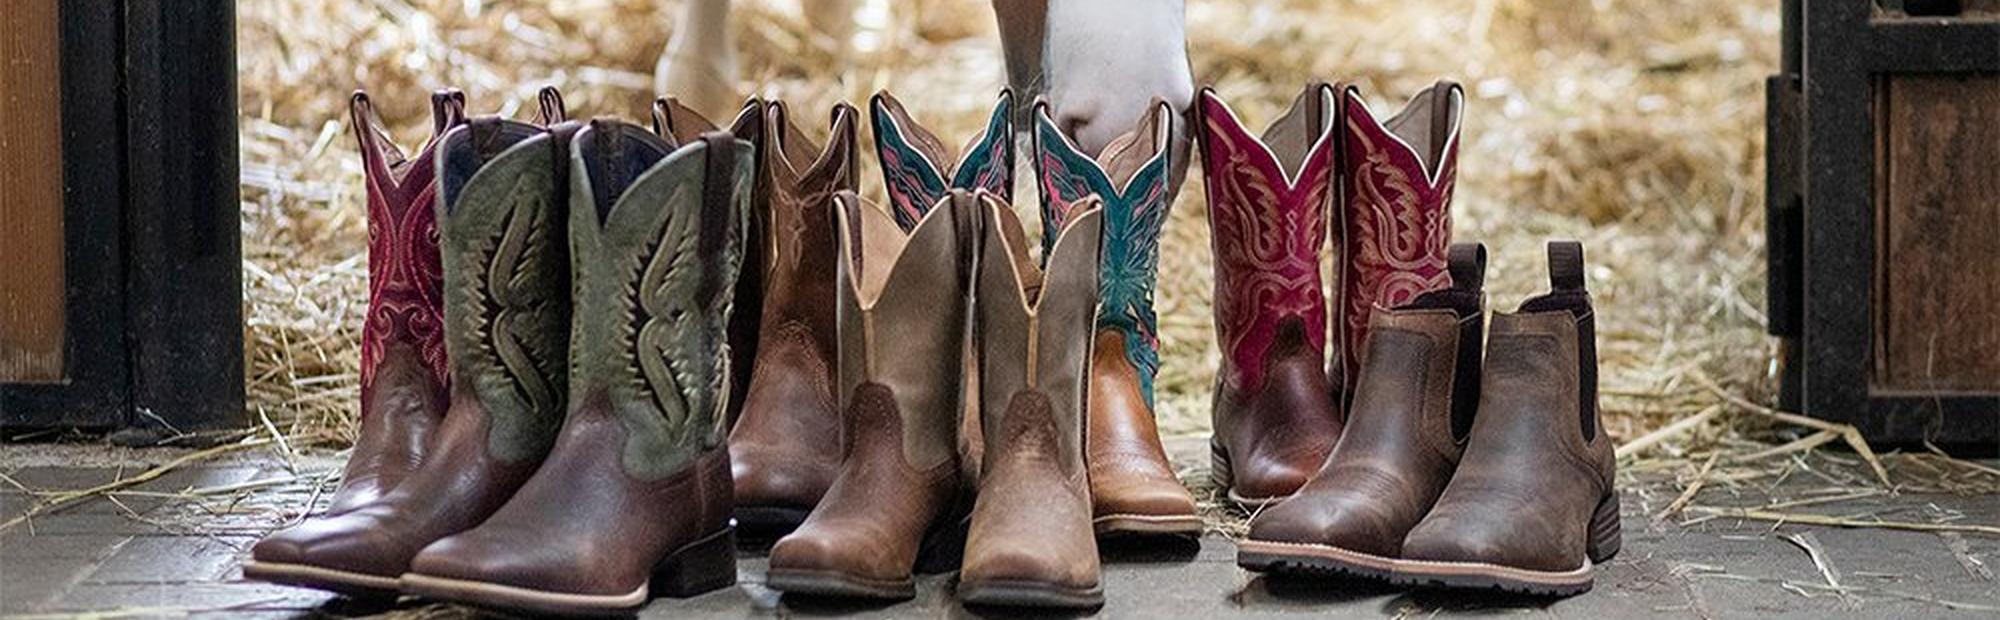 How to Stretch Your Cowboy Boots for Comfort | Ariat